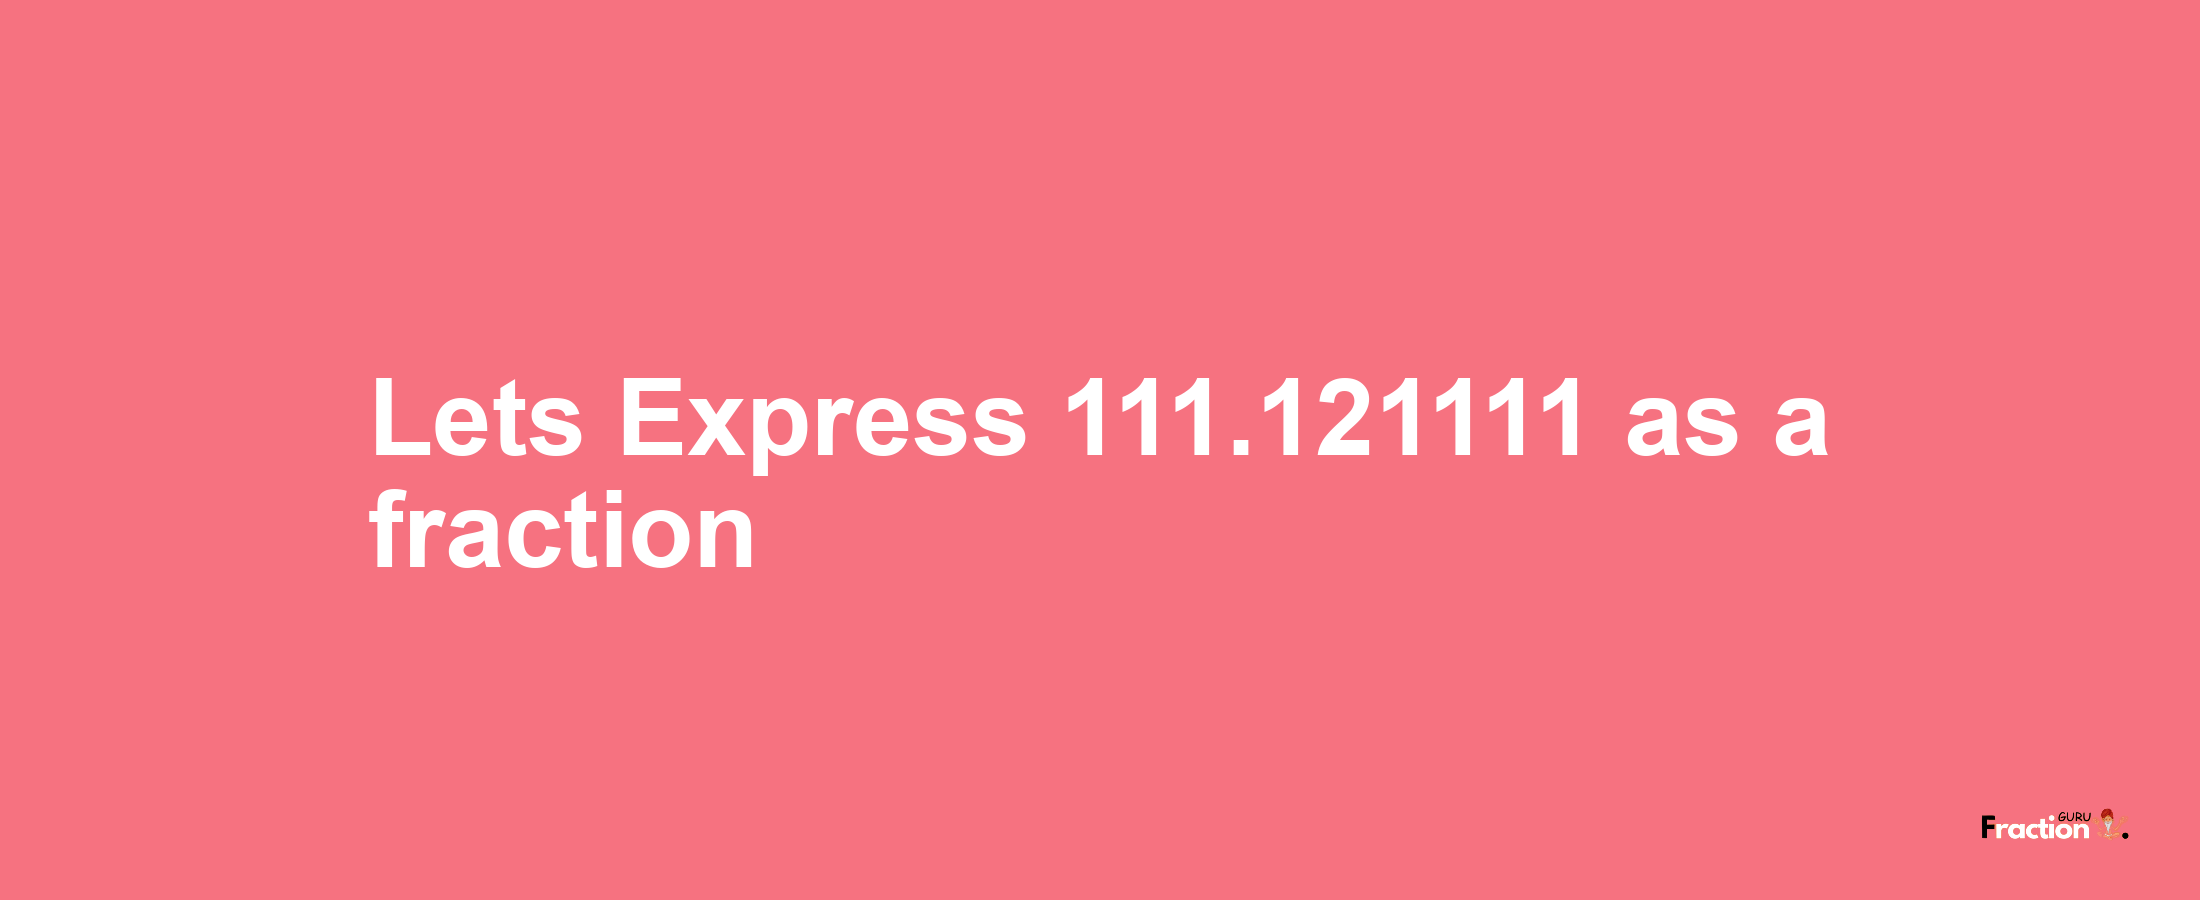 Lets Express 111.121111 as afraction